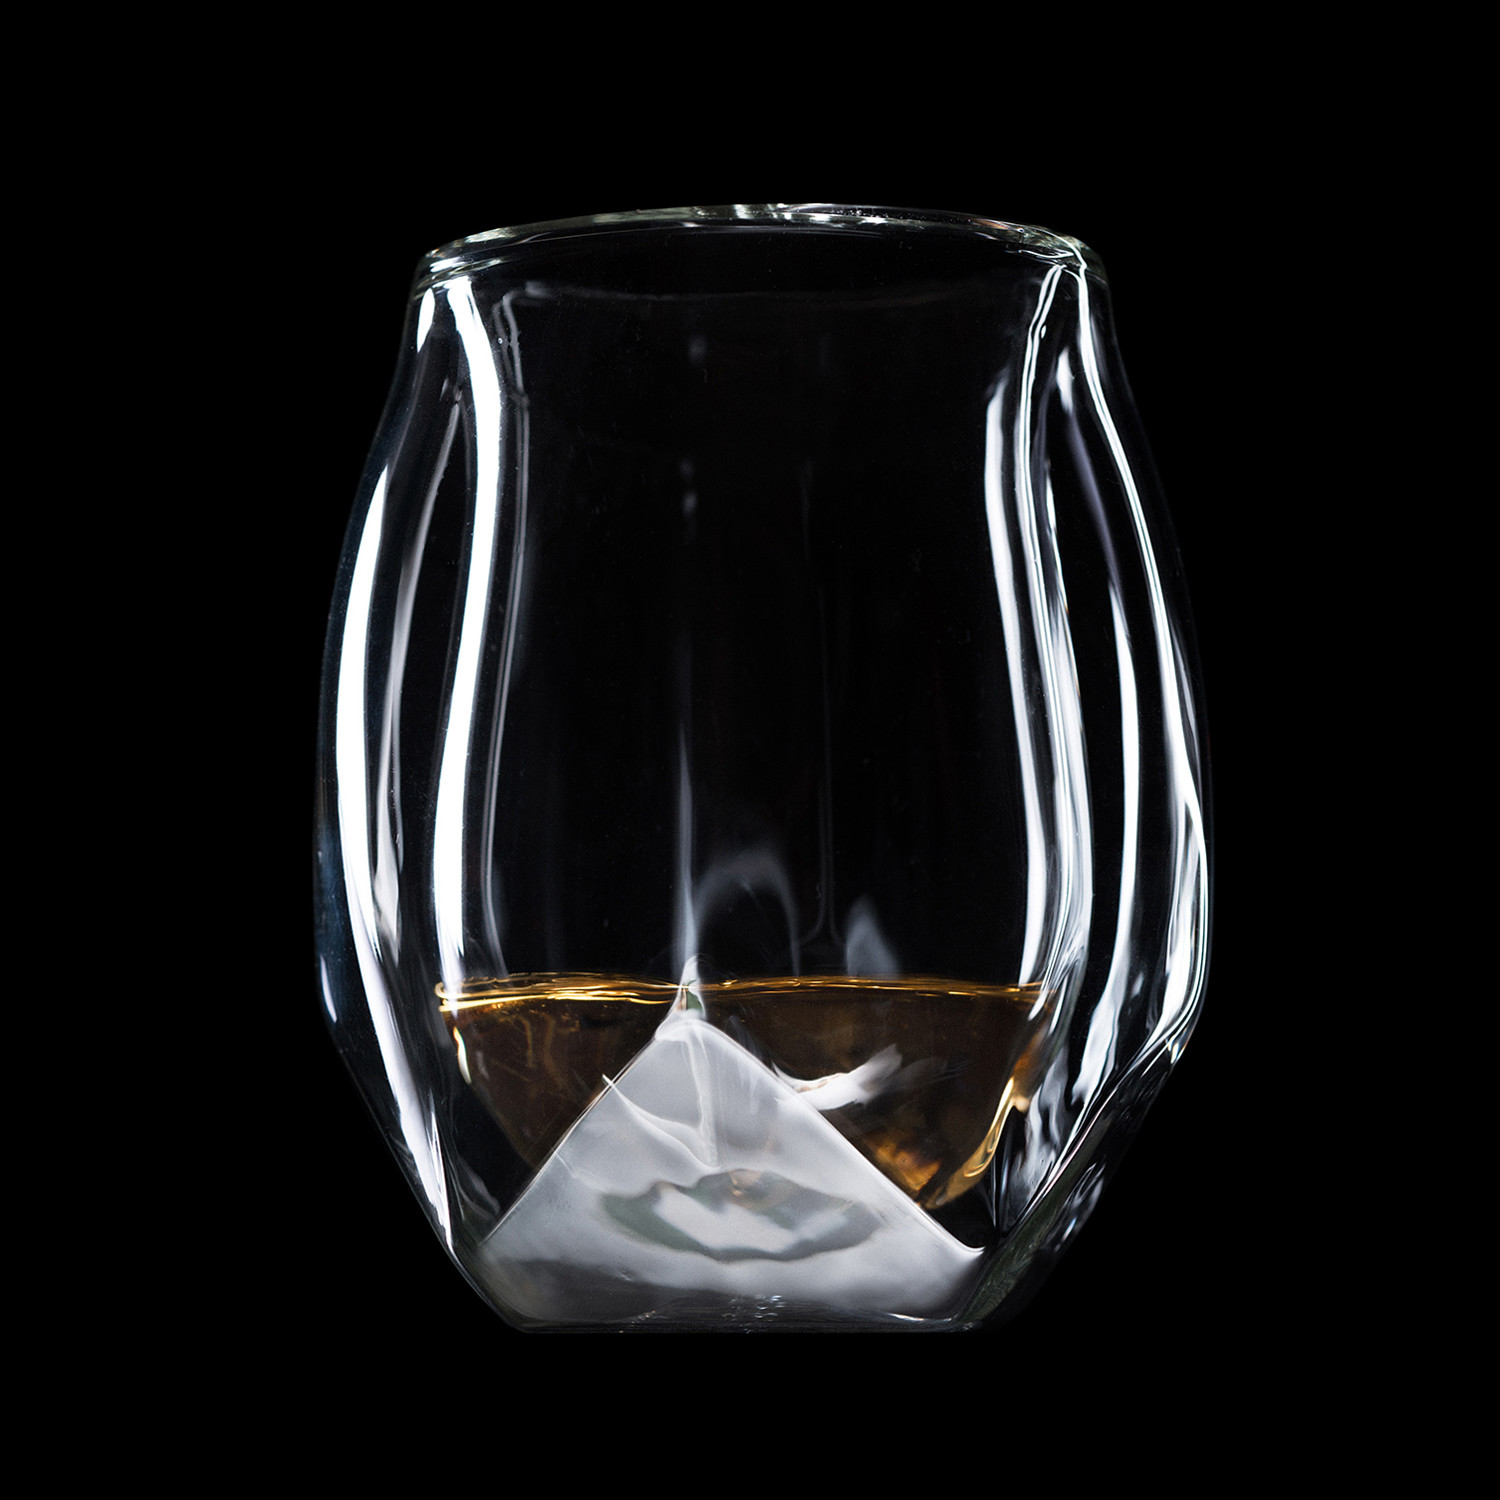 Norlan Whisky Glass, Set of 2 856515006002